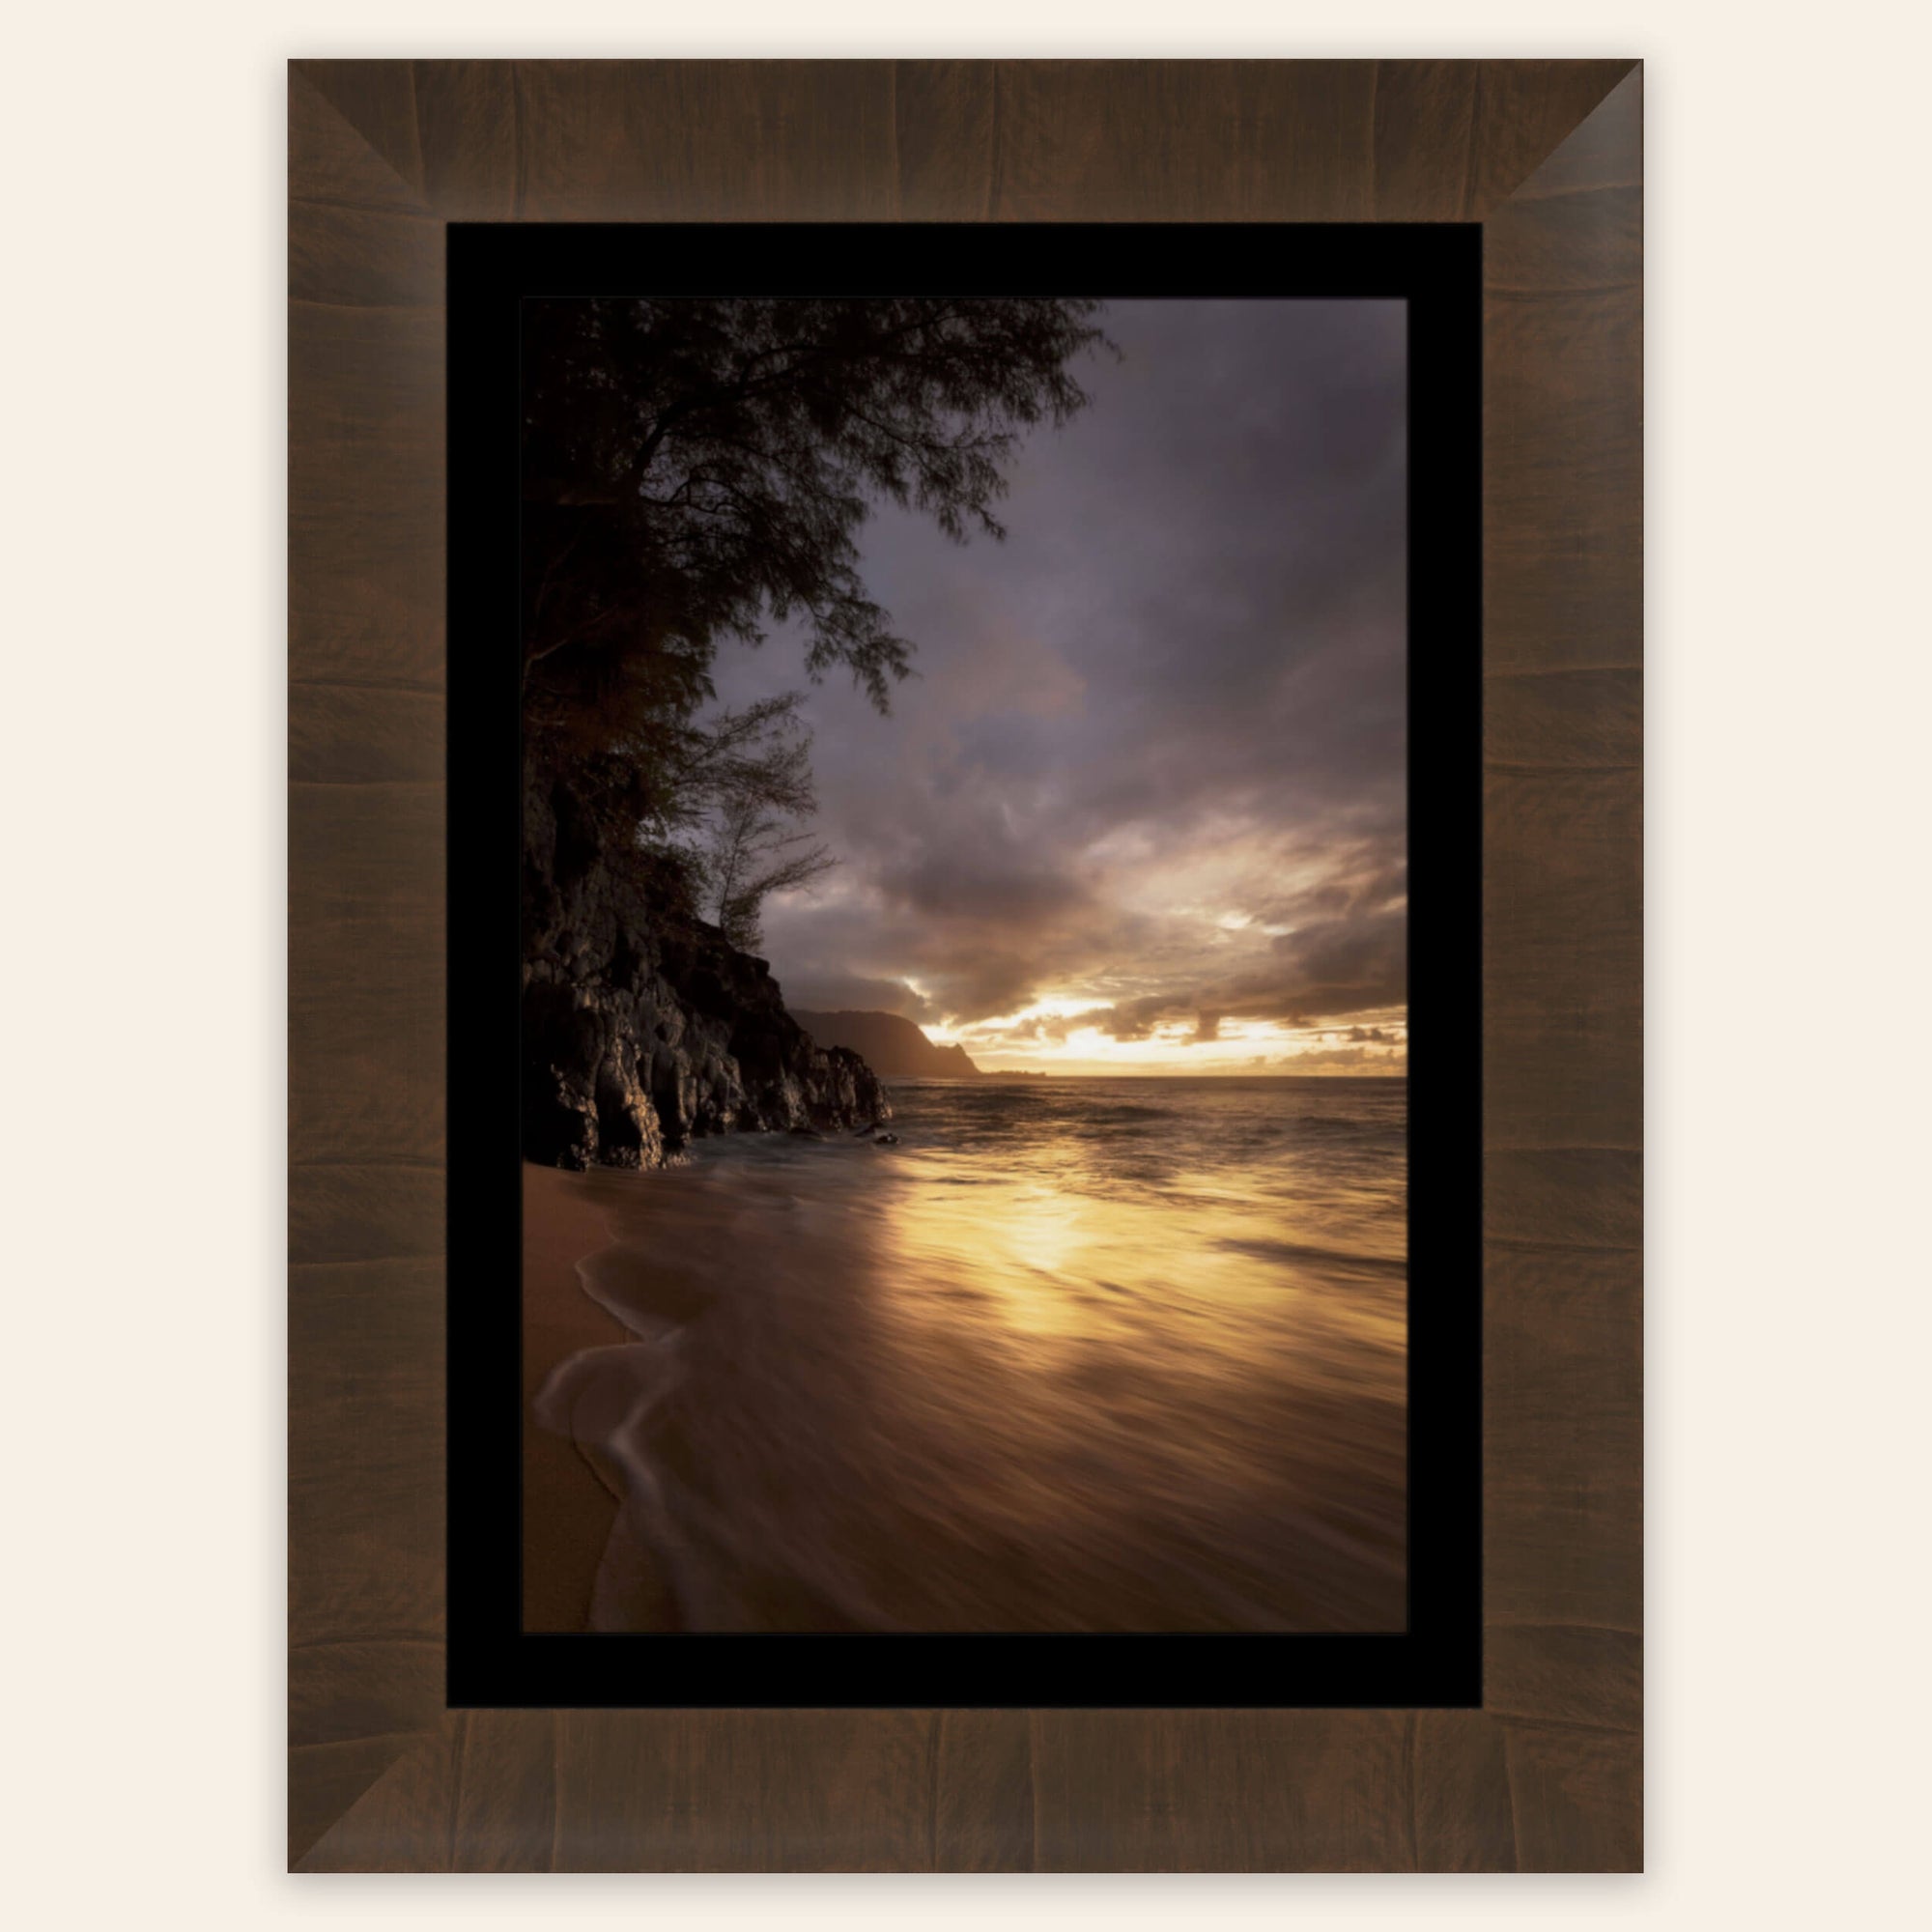 A framed sunset picture from Hideaway Beach in Princeville, Kauai.